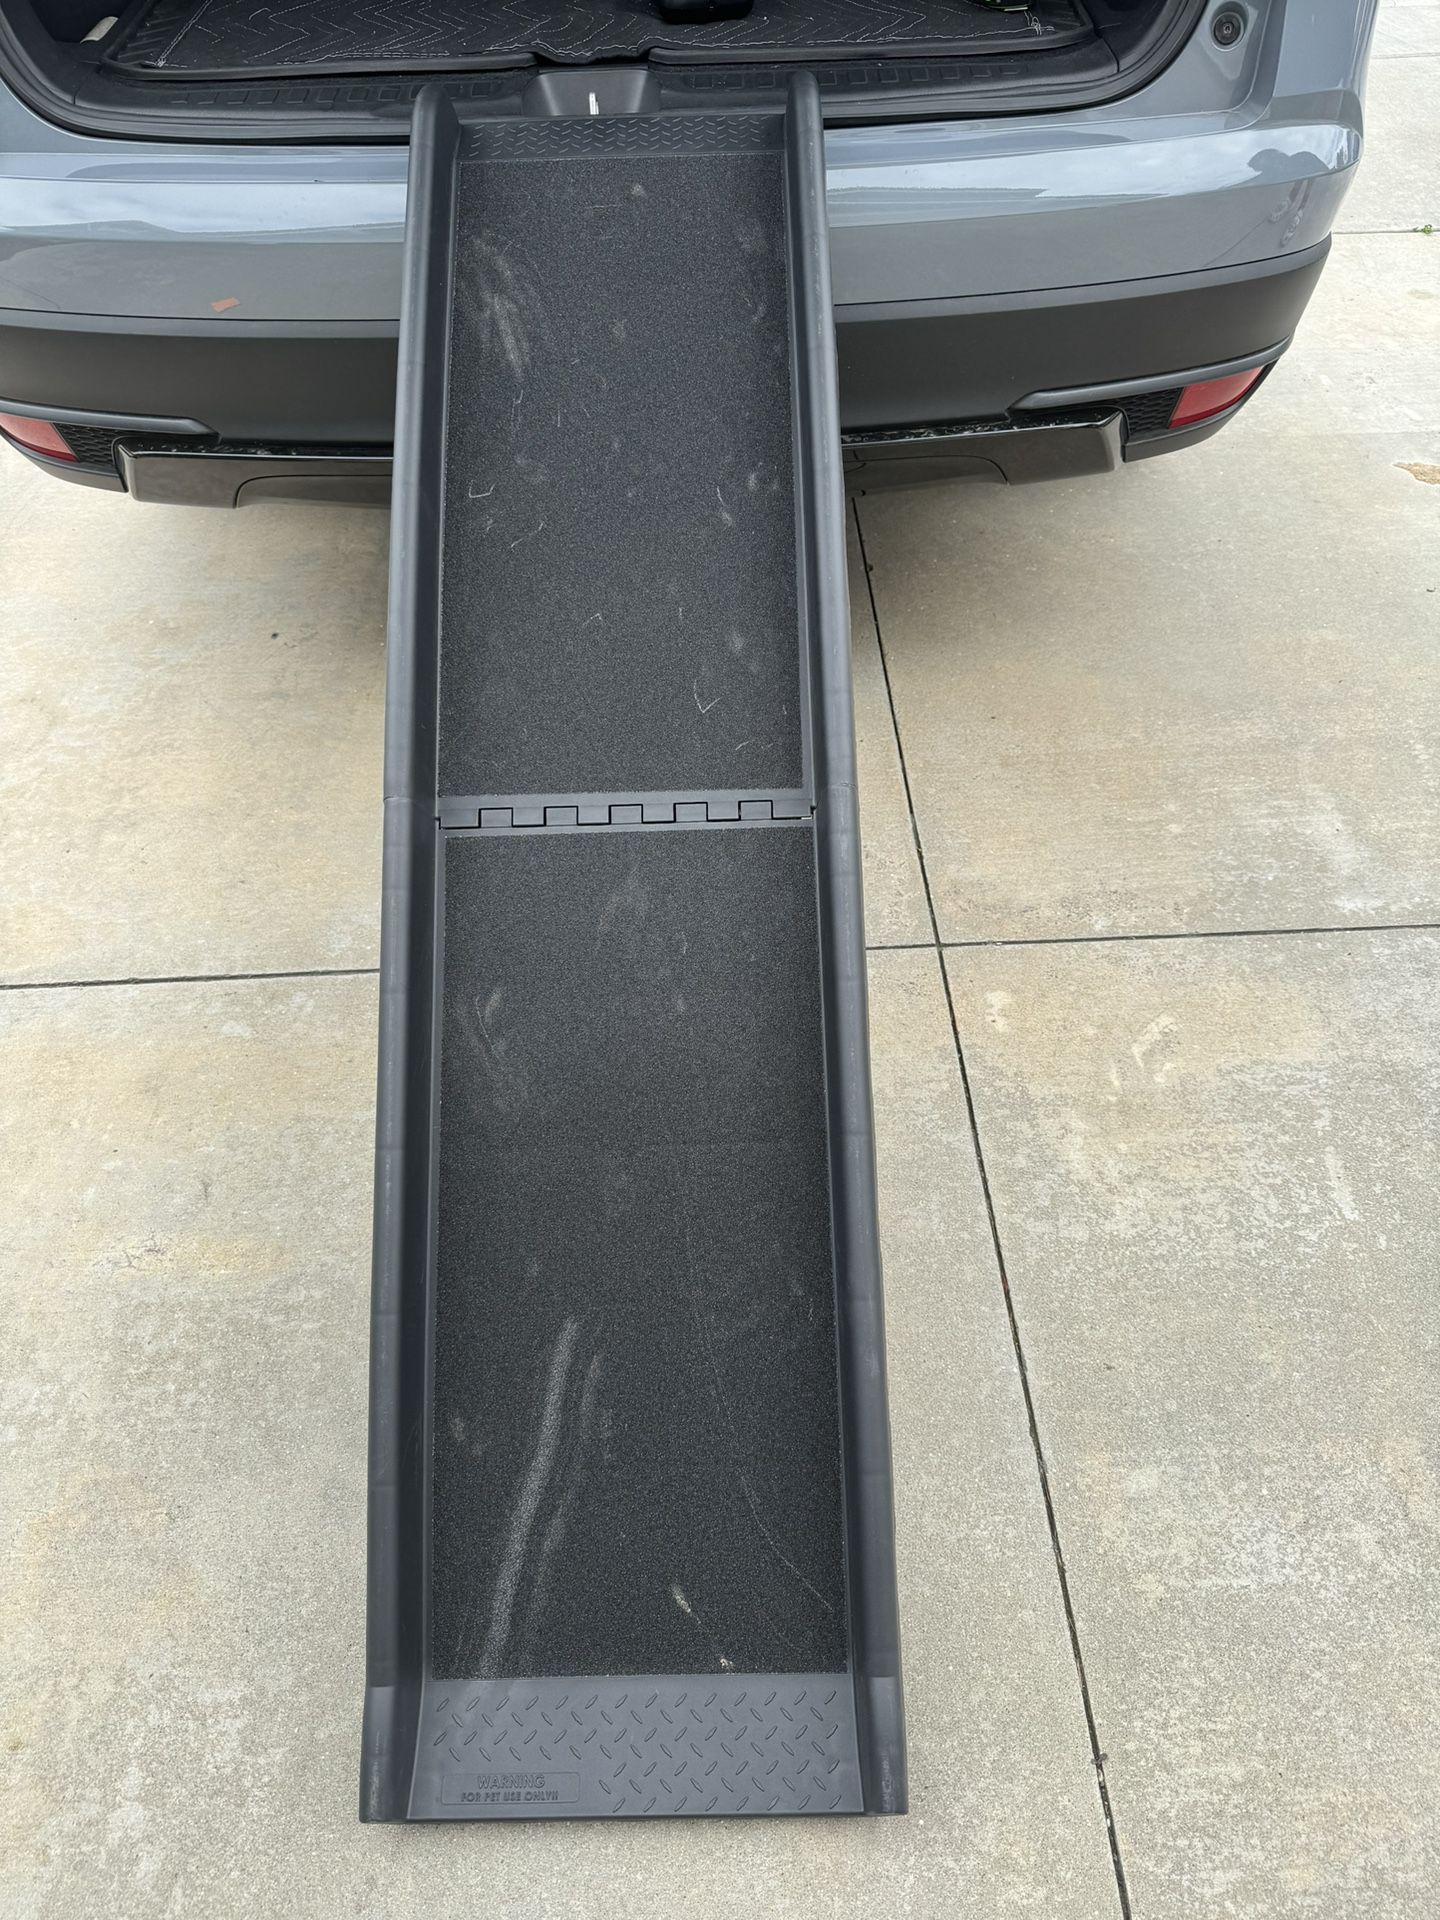 Hard Plastic Folding Ramp For Car Or Inside. 62” Long Weight Limit 150 Pounds